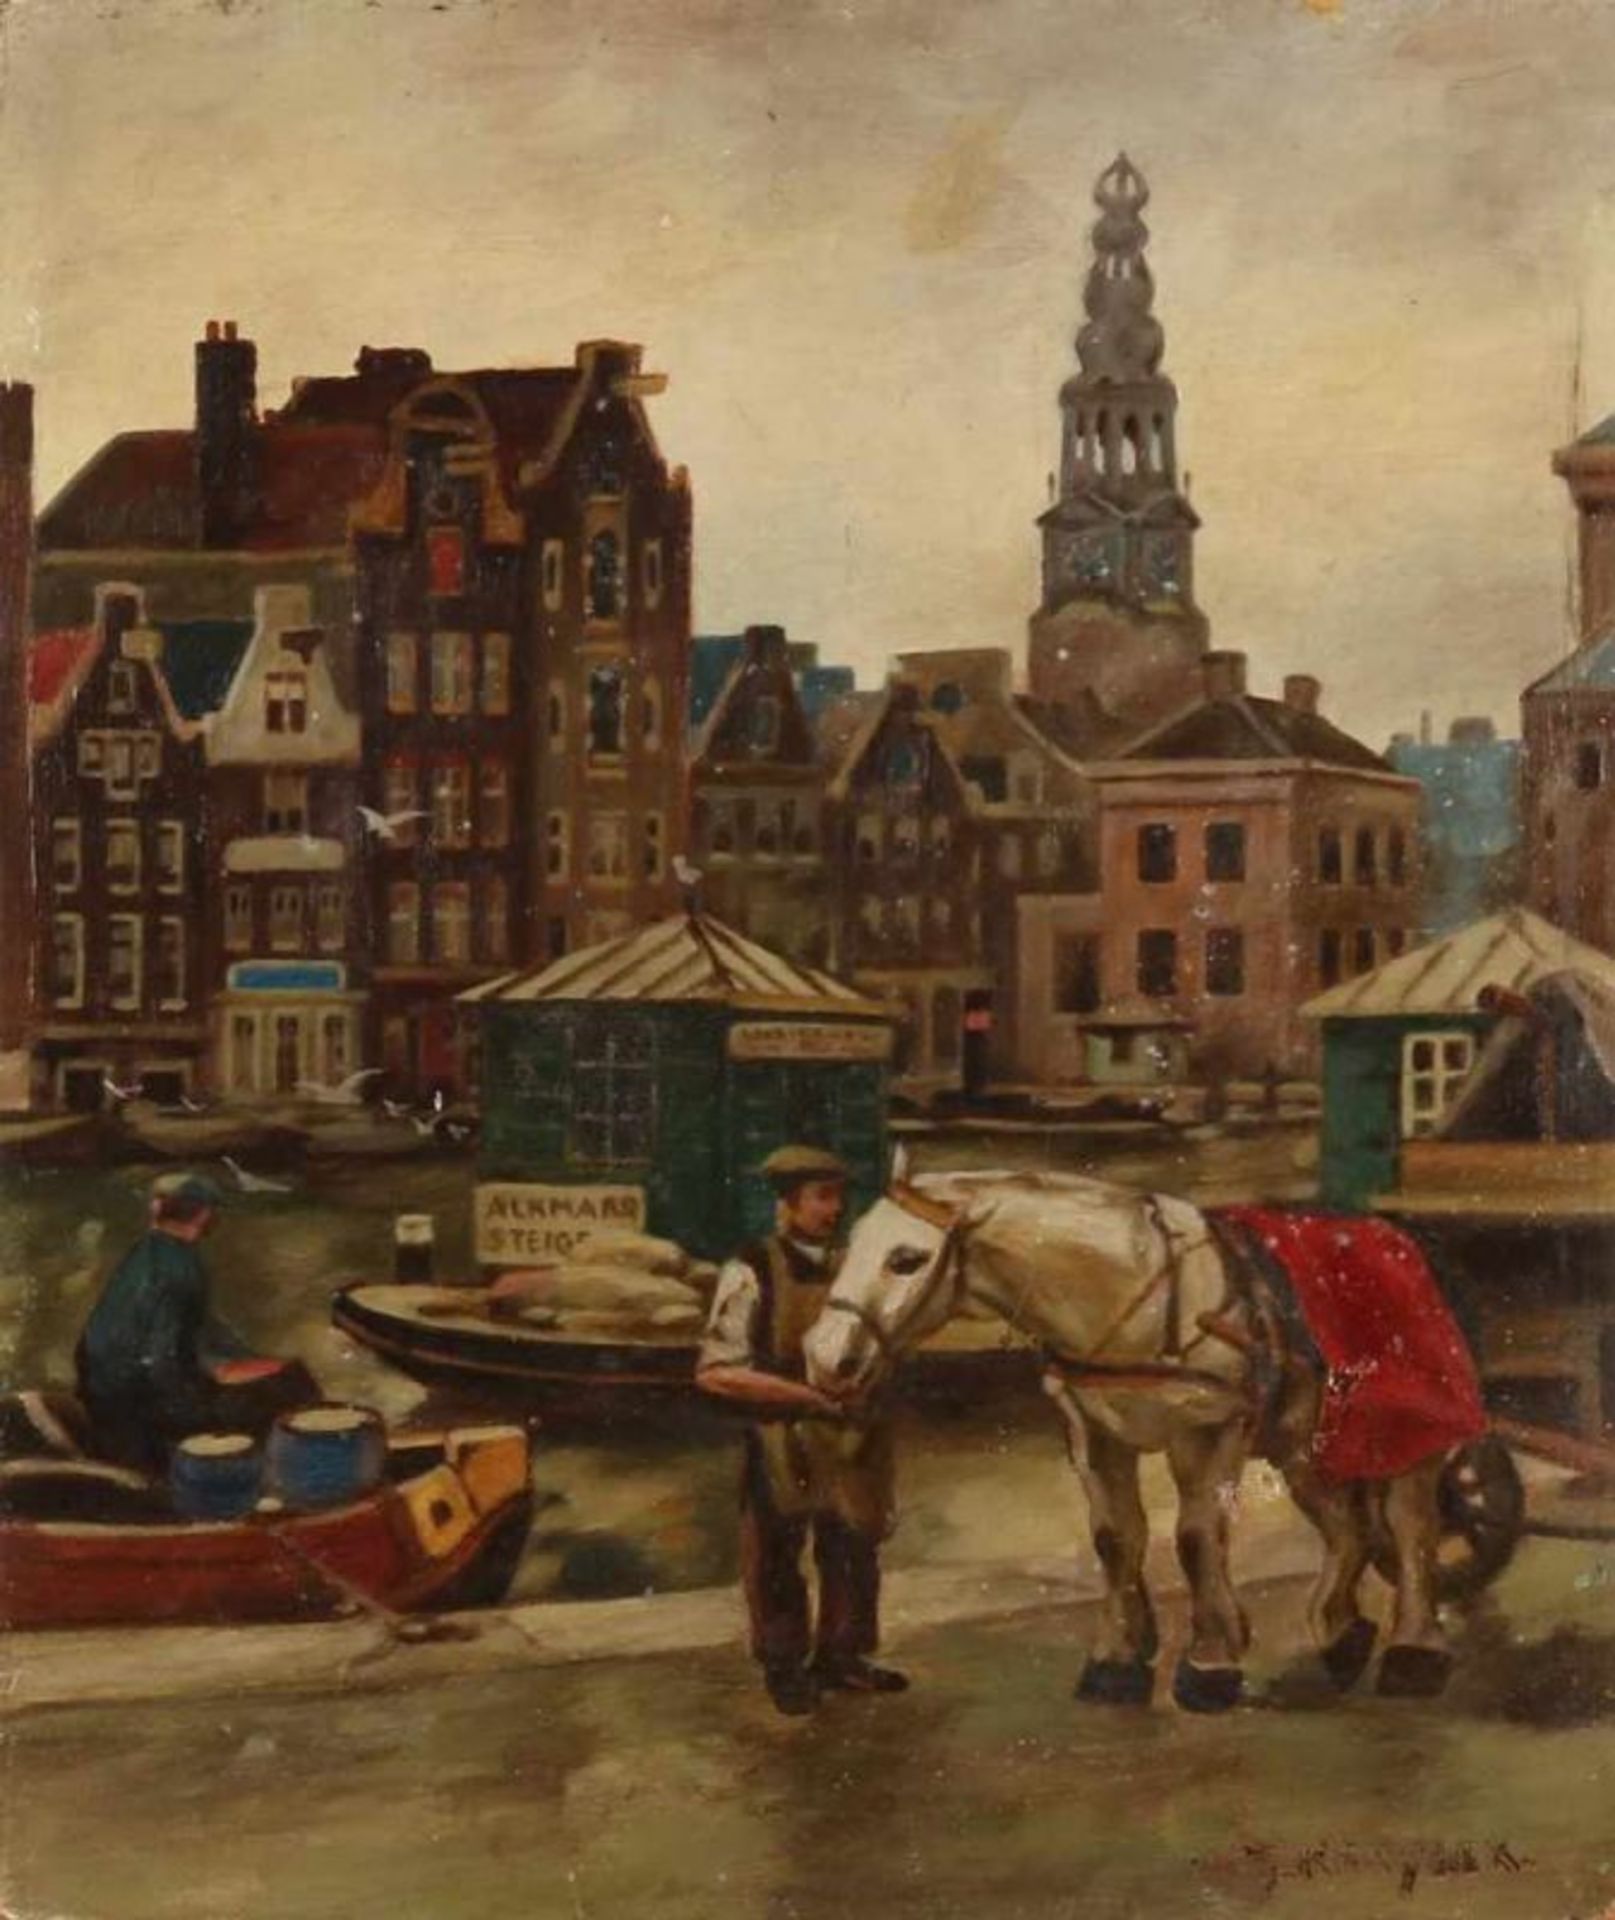 Unclear signed. Around 1920. Amsterdam quay at Alkmaar jetty. Oil paint on panel. Dimensions: H 34 x